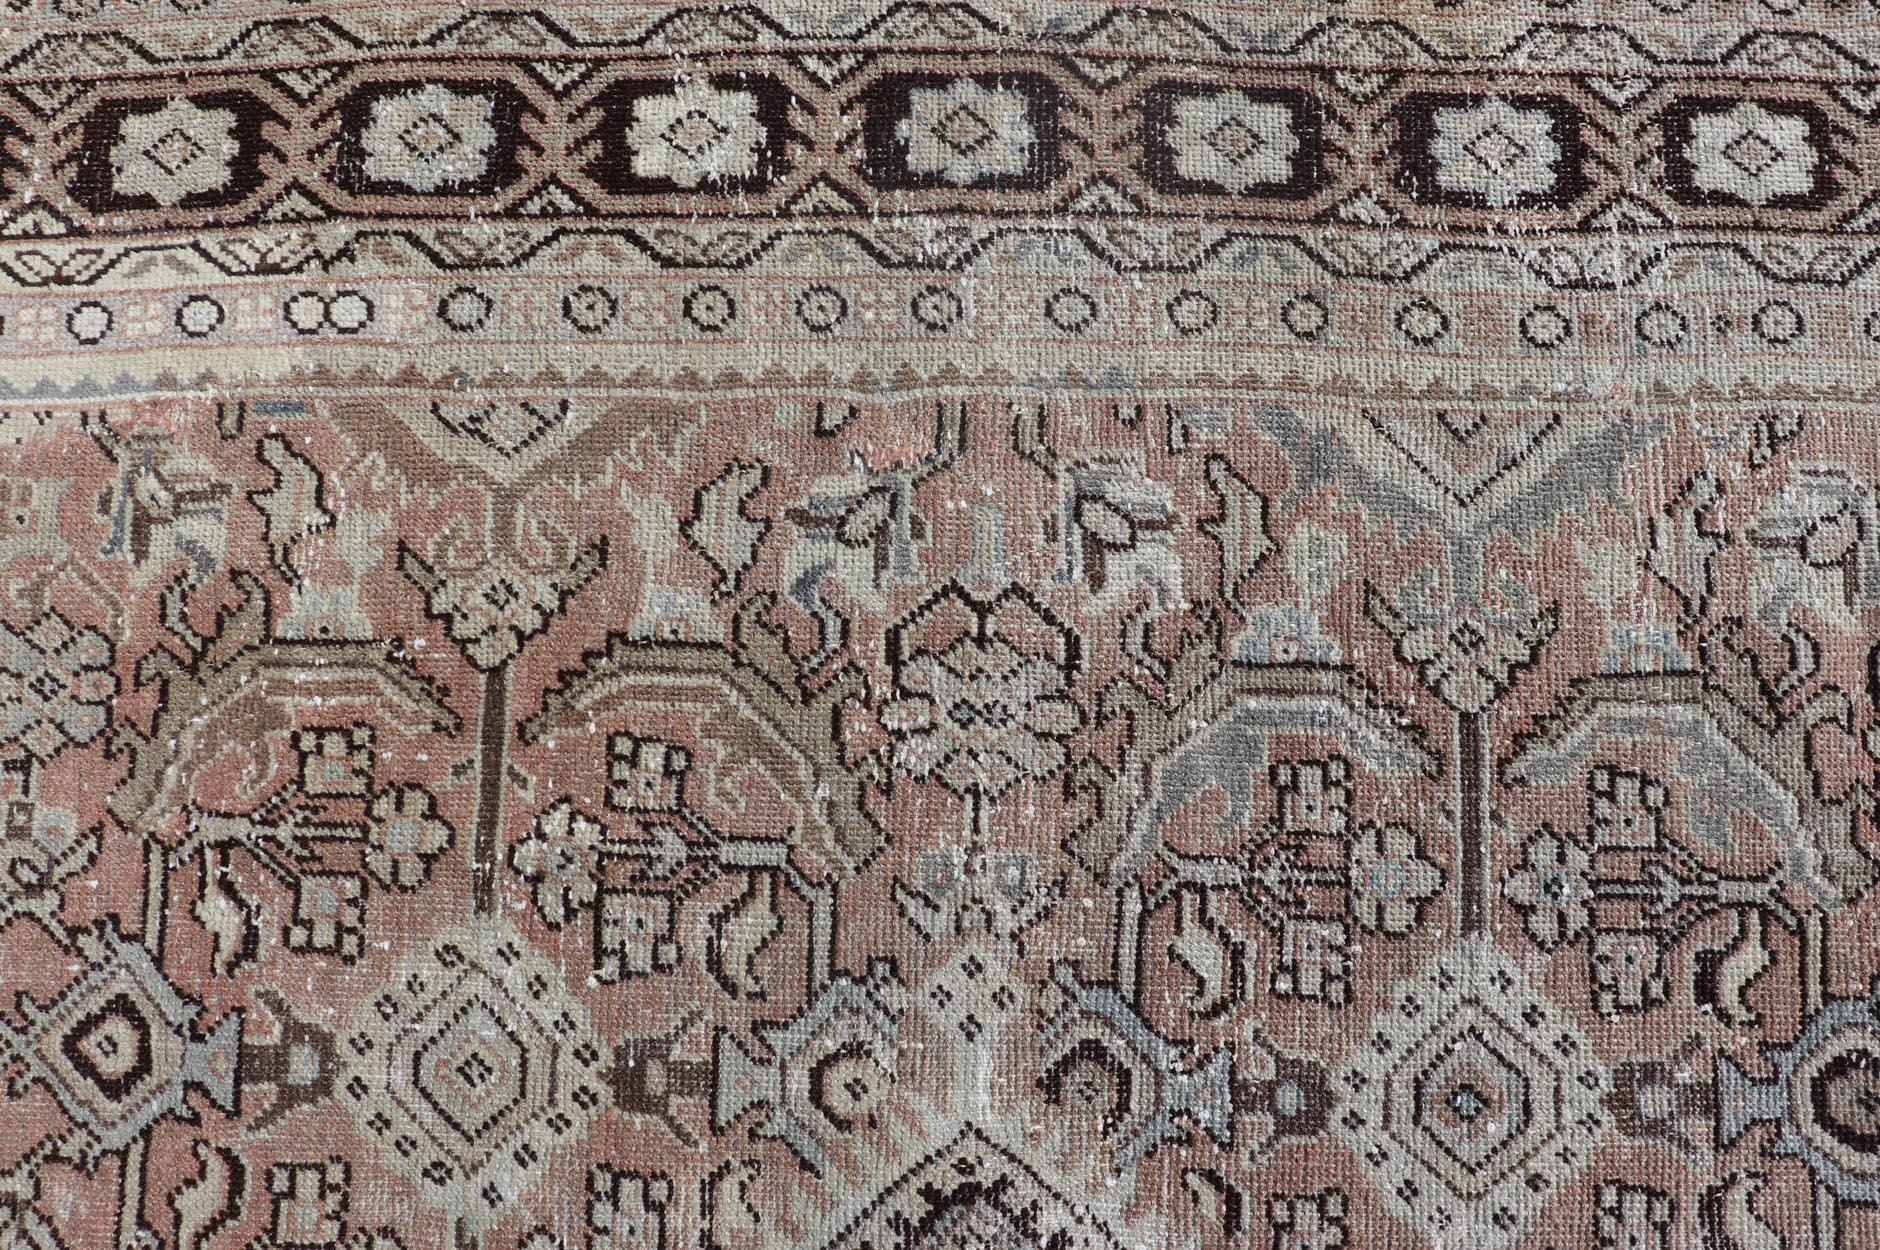 Vintage Sultanabad-Mahal Rug in earthy tones with browns. 
Keivan Woven Arts / rug PTA-200739, country of origin / type: Persian / Sultanabad-Mahal, circa Early-20th Century.

Measures: 9'0 x 11'10.